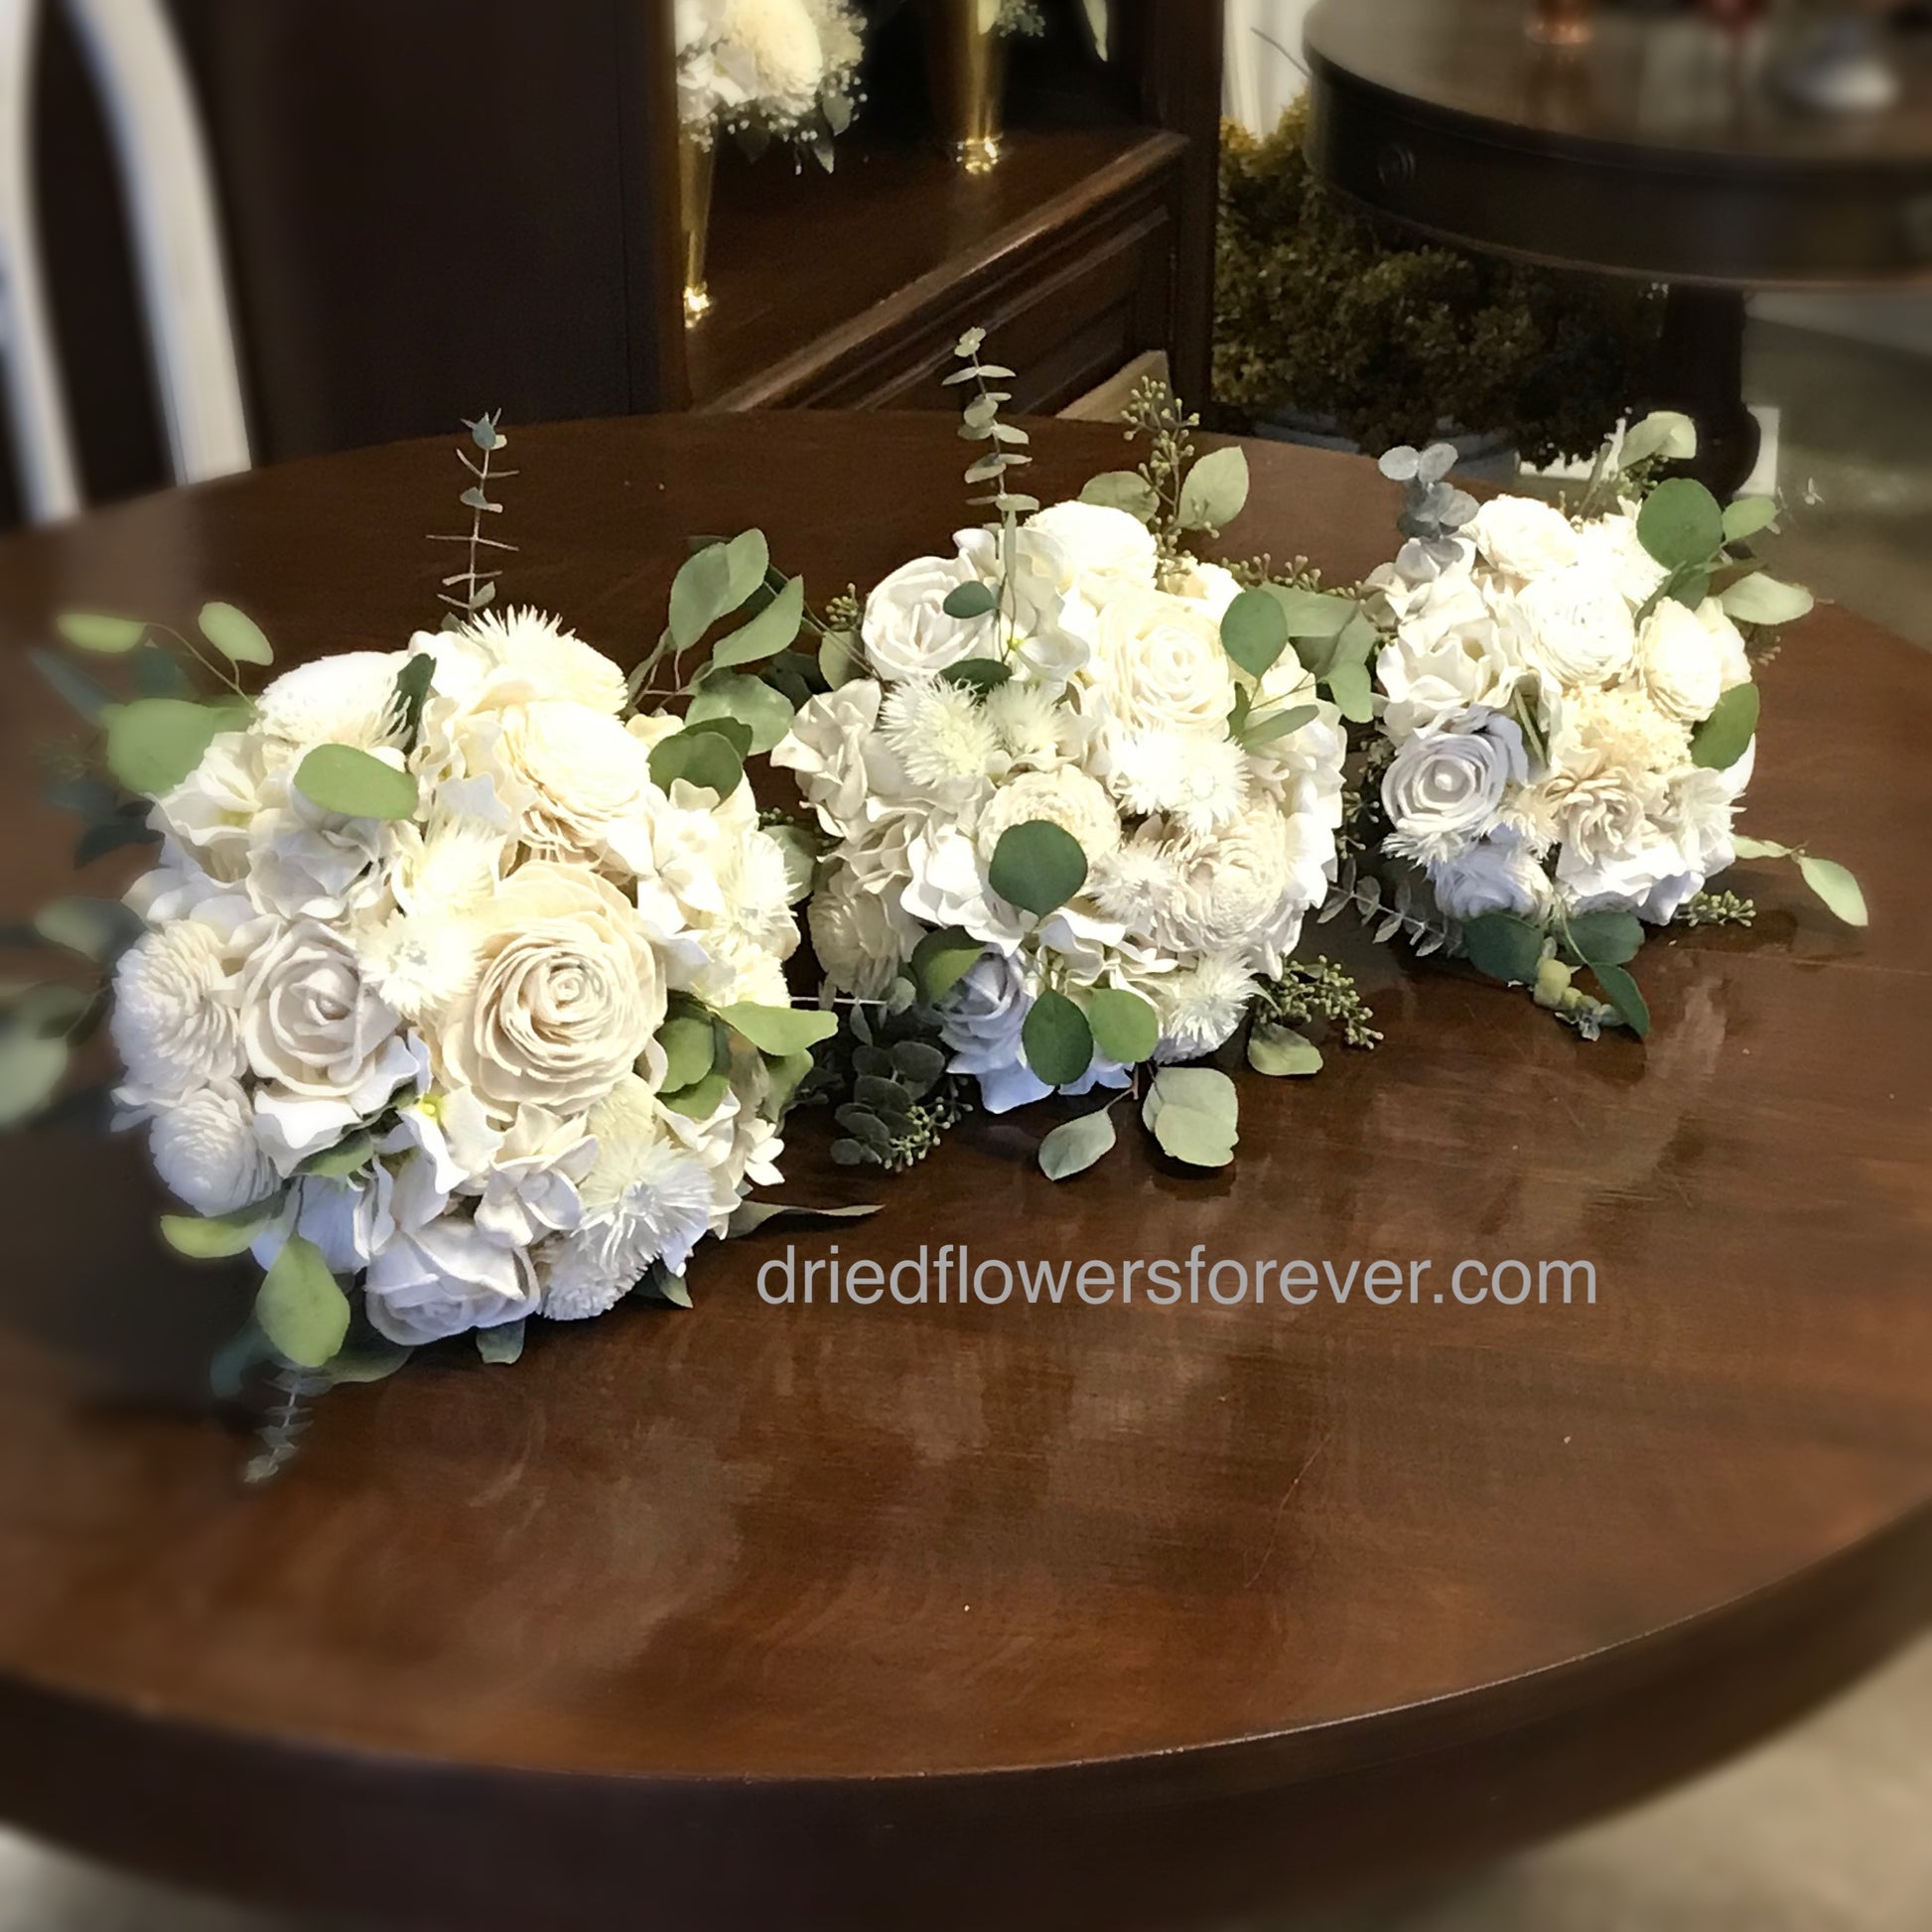 1 Flower Bouquets,Total of 6 Baby Breath Flowers and 6 Silver